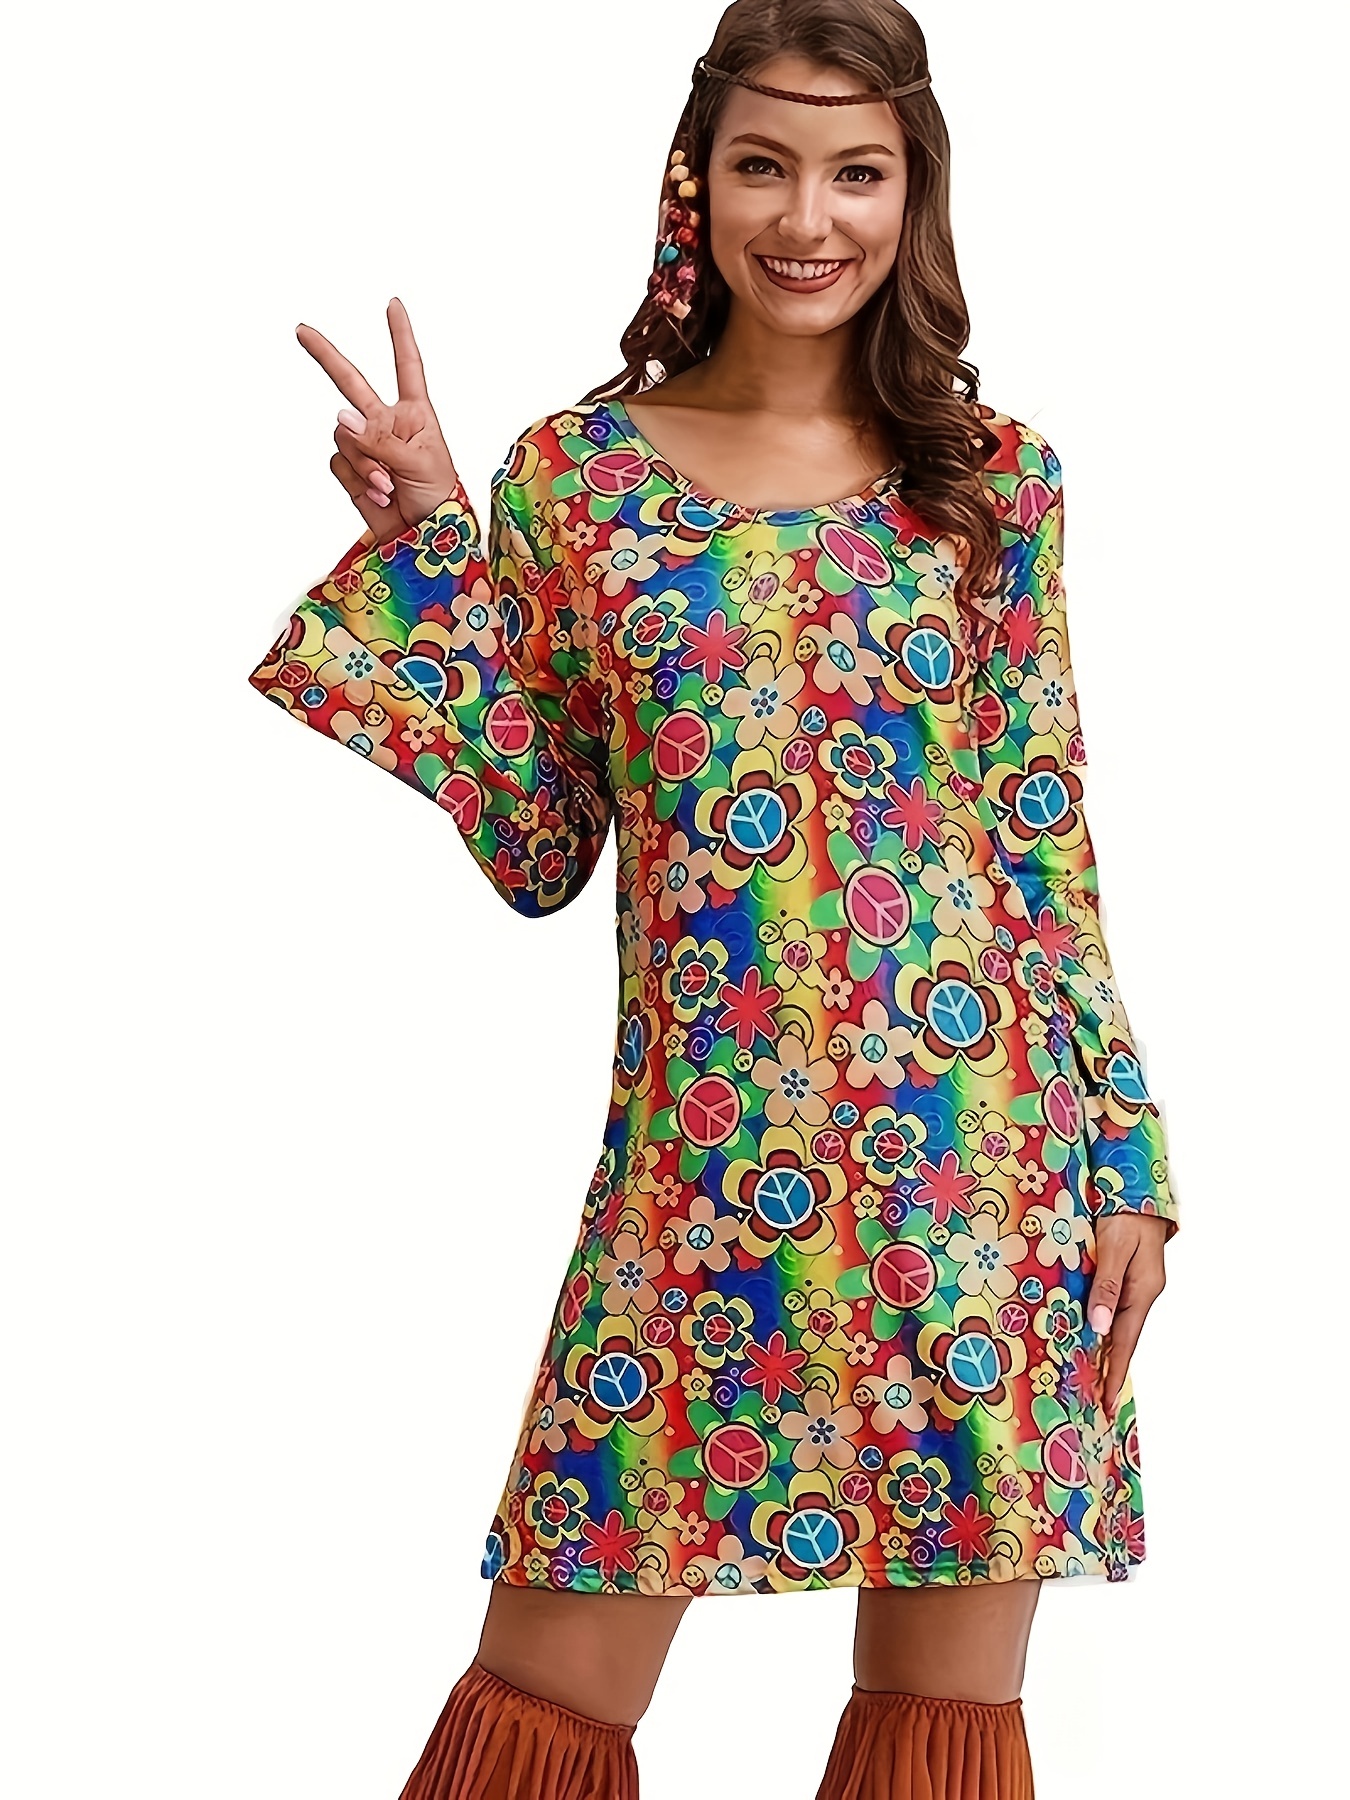 Home  Hippie outfits, Retro outfits, Clothes